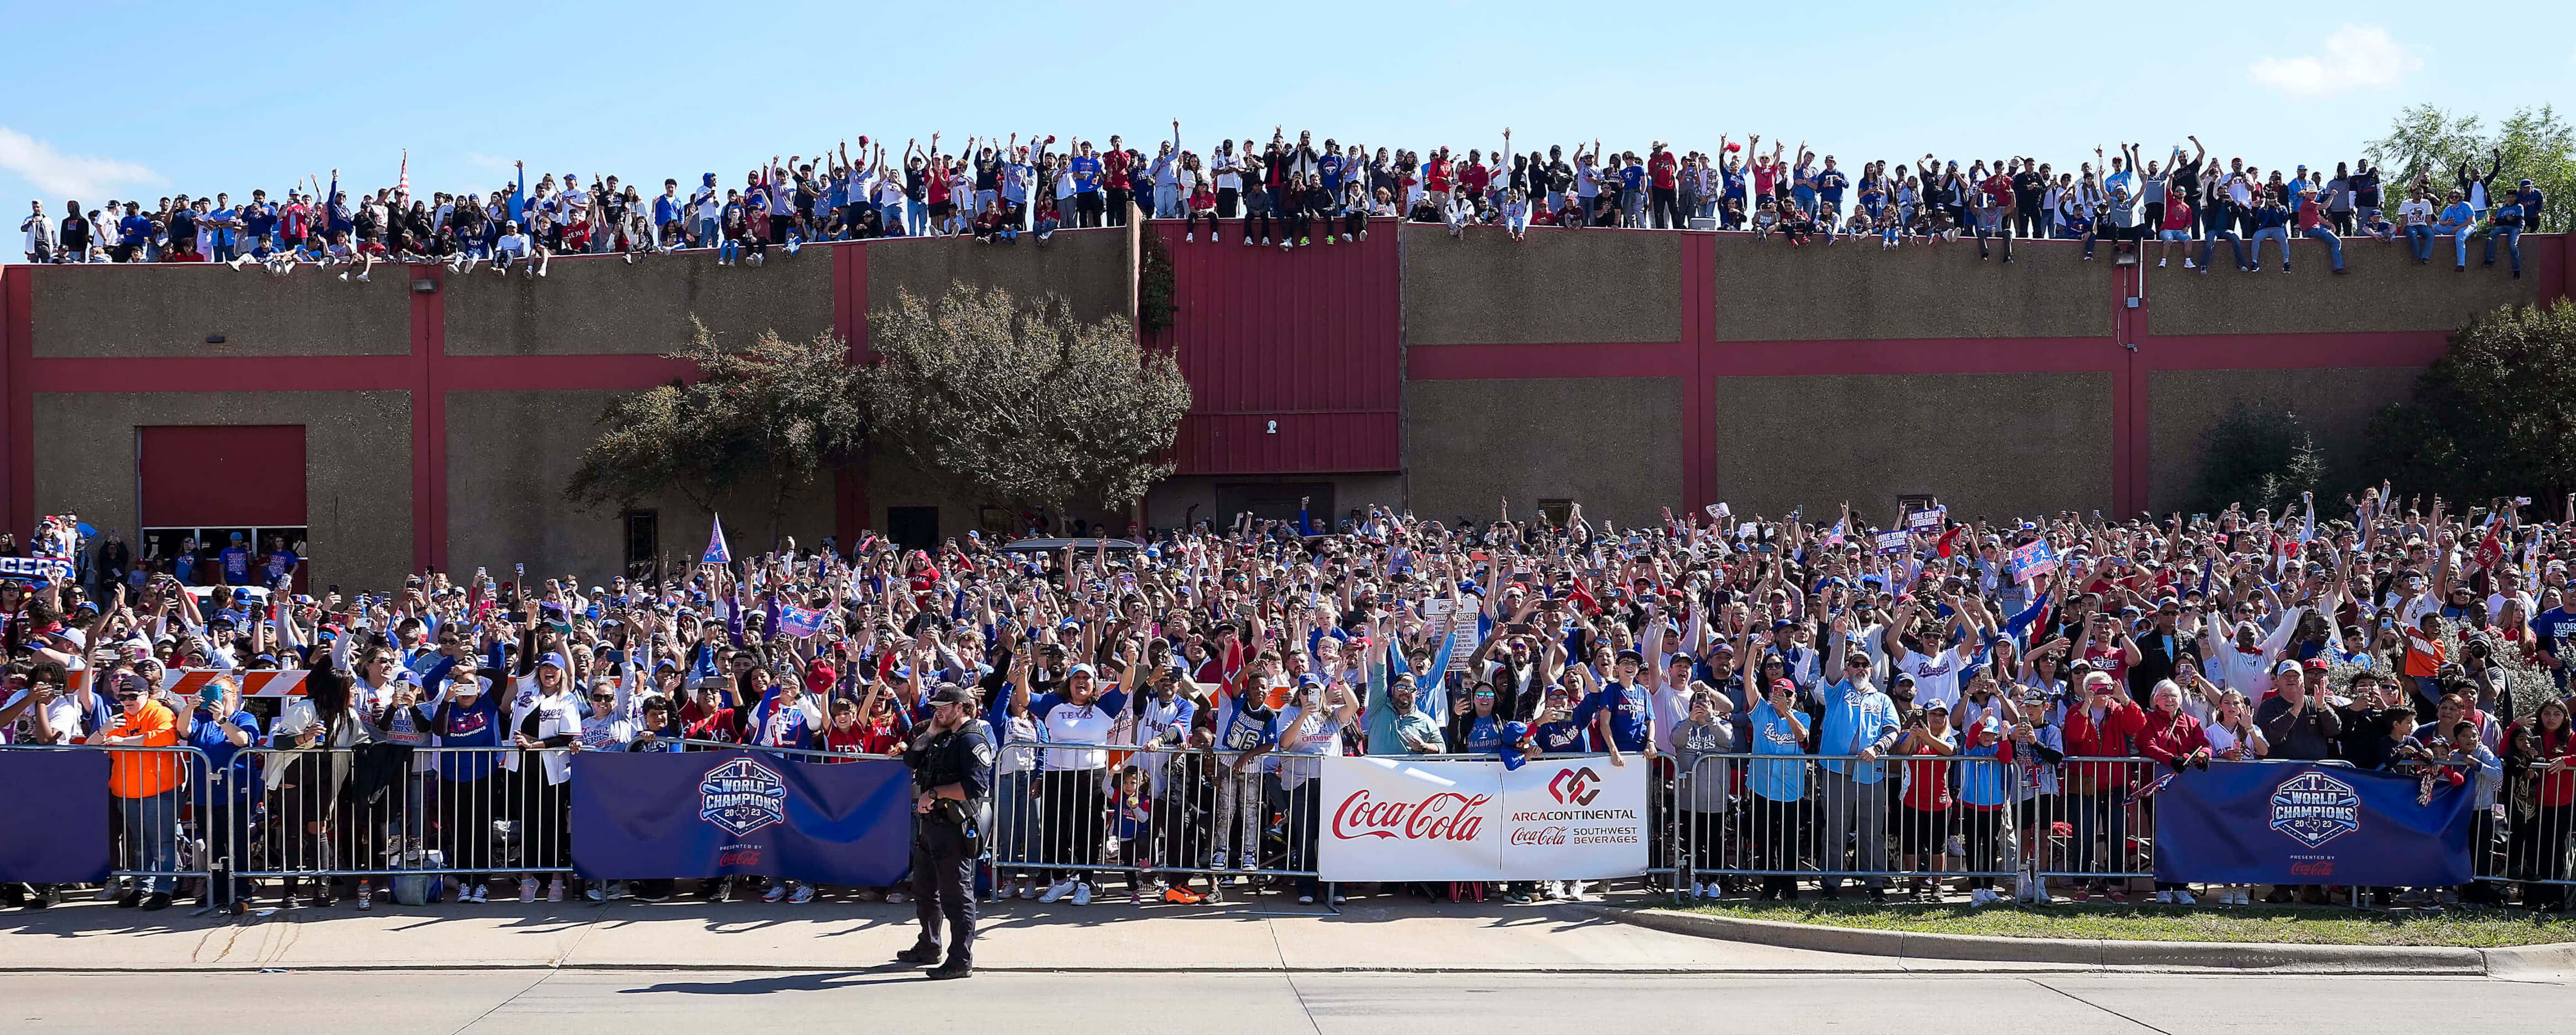 Fans line the parade route and rooftops during the Texas Rangers World Series victory...